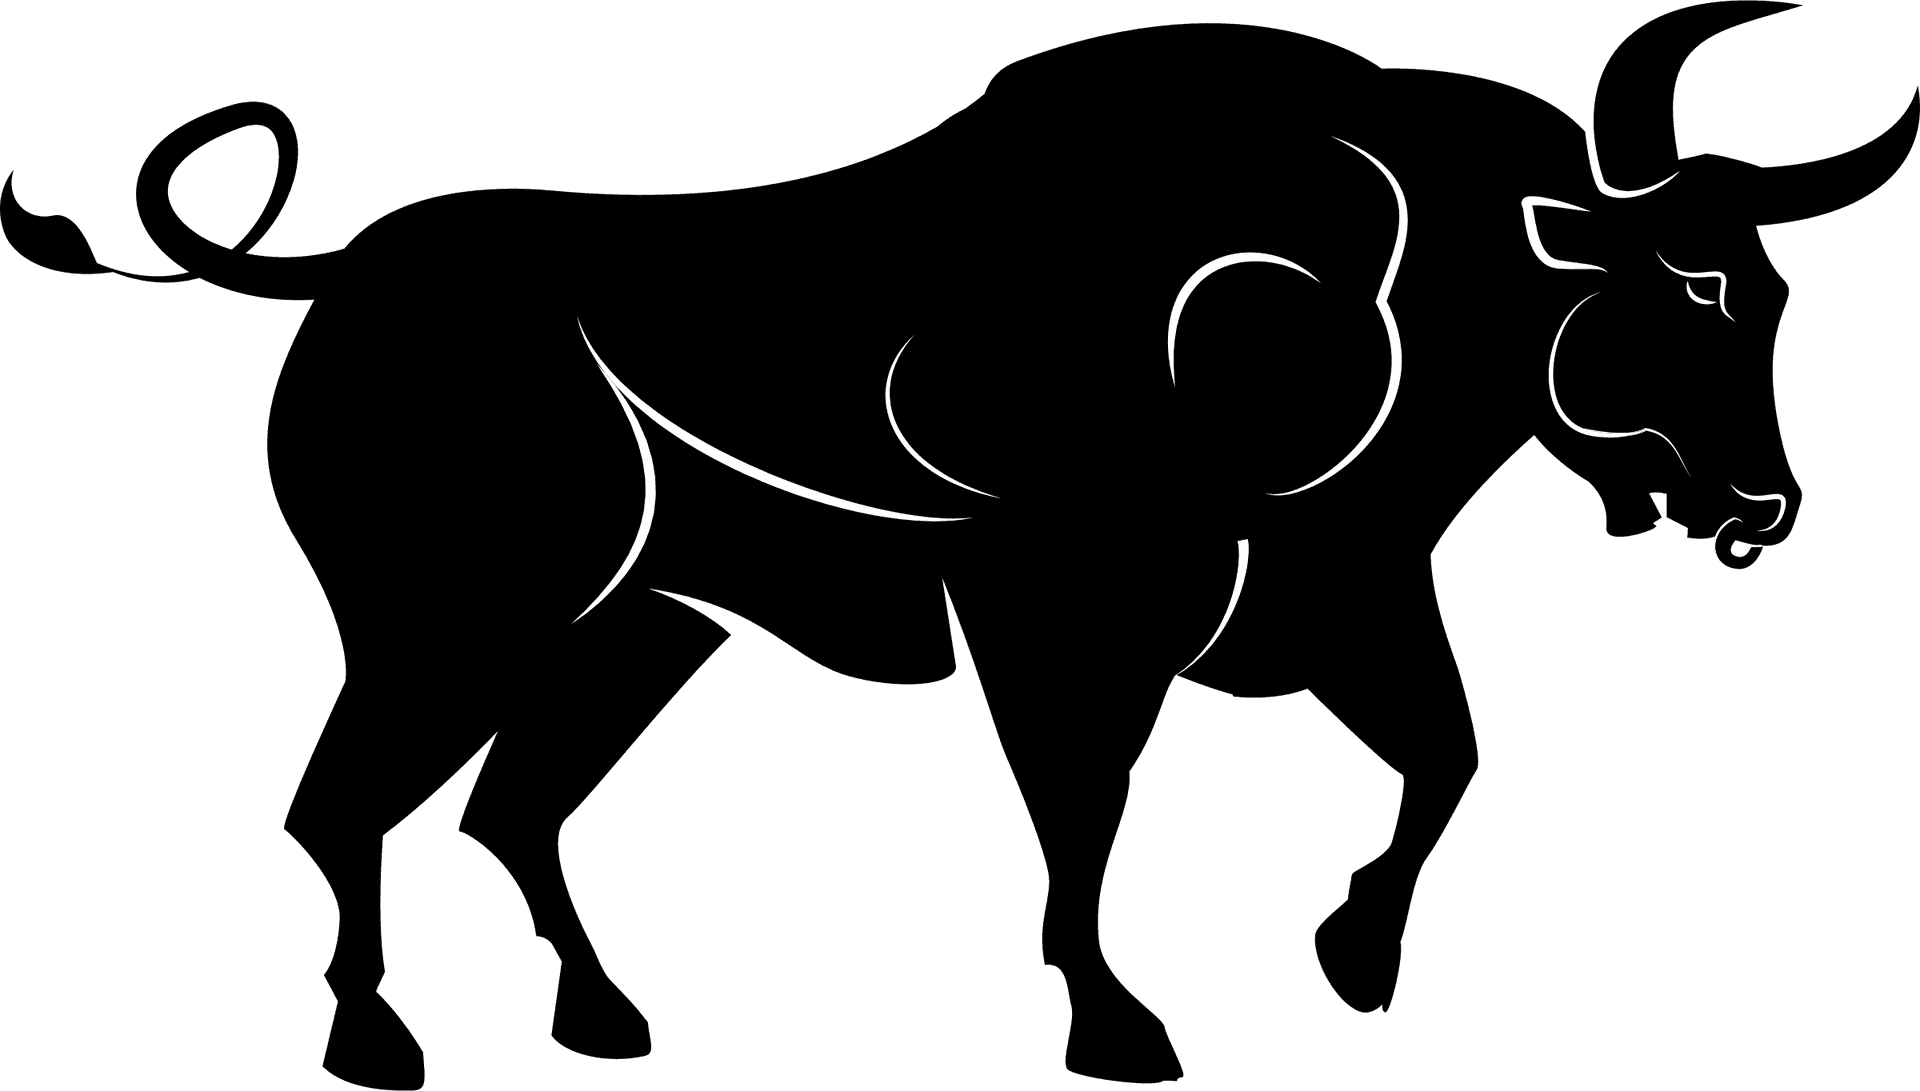 Bull Silhouette Graphic PNG